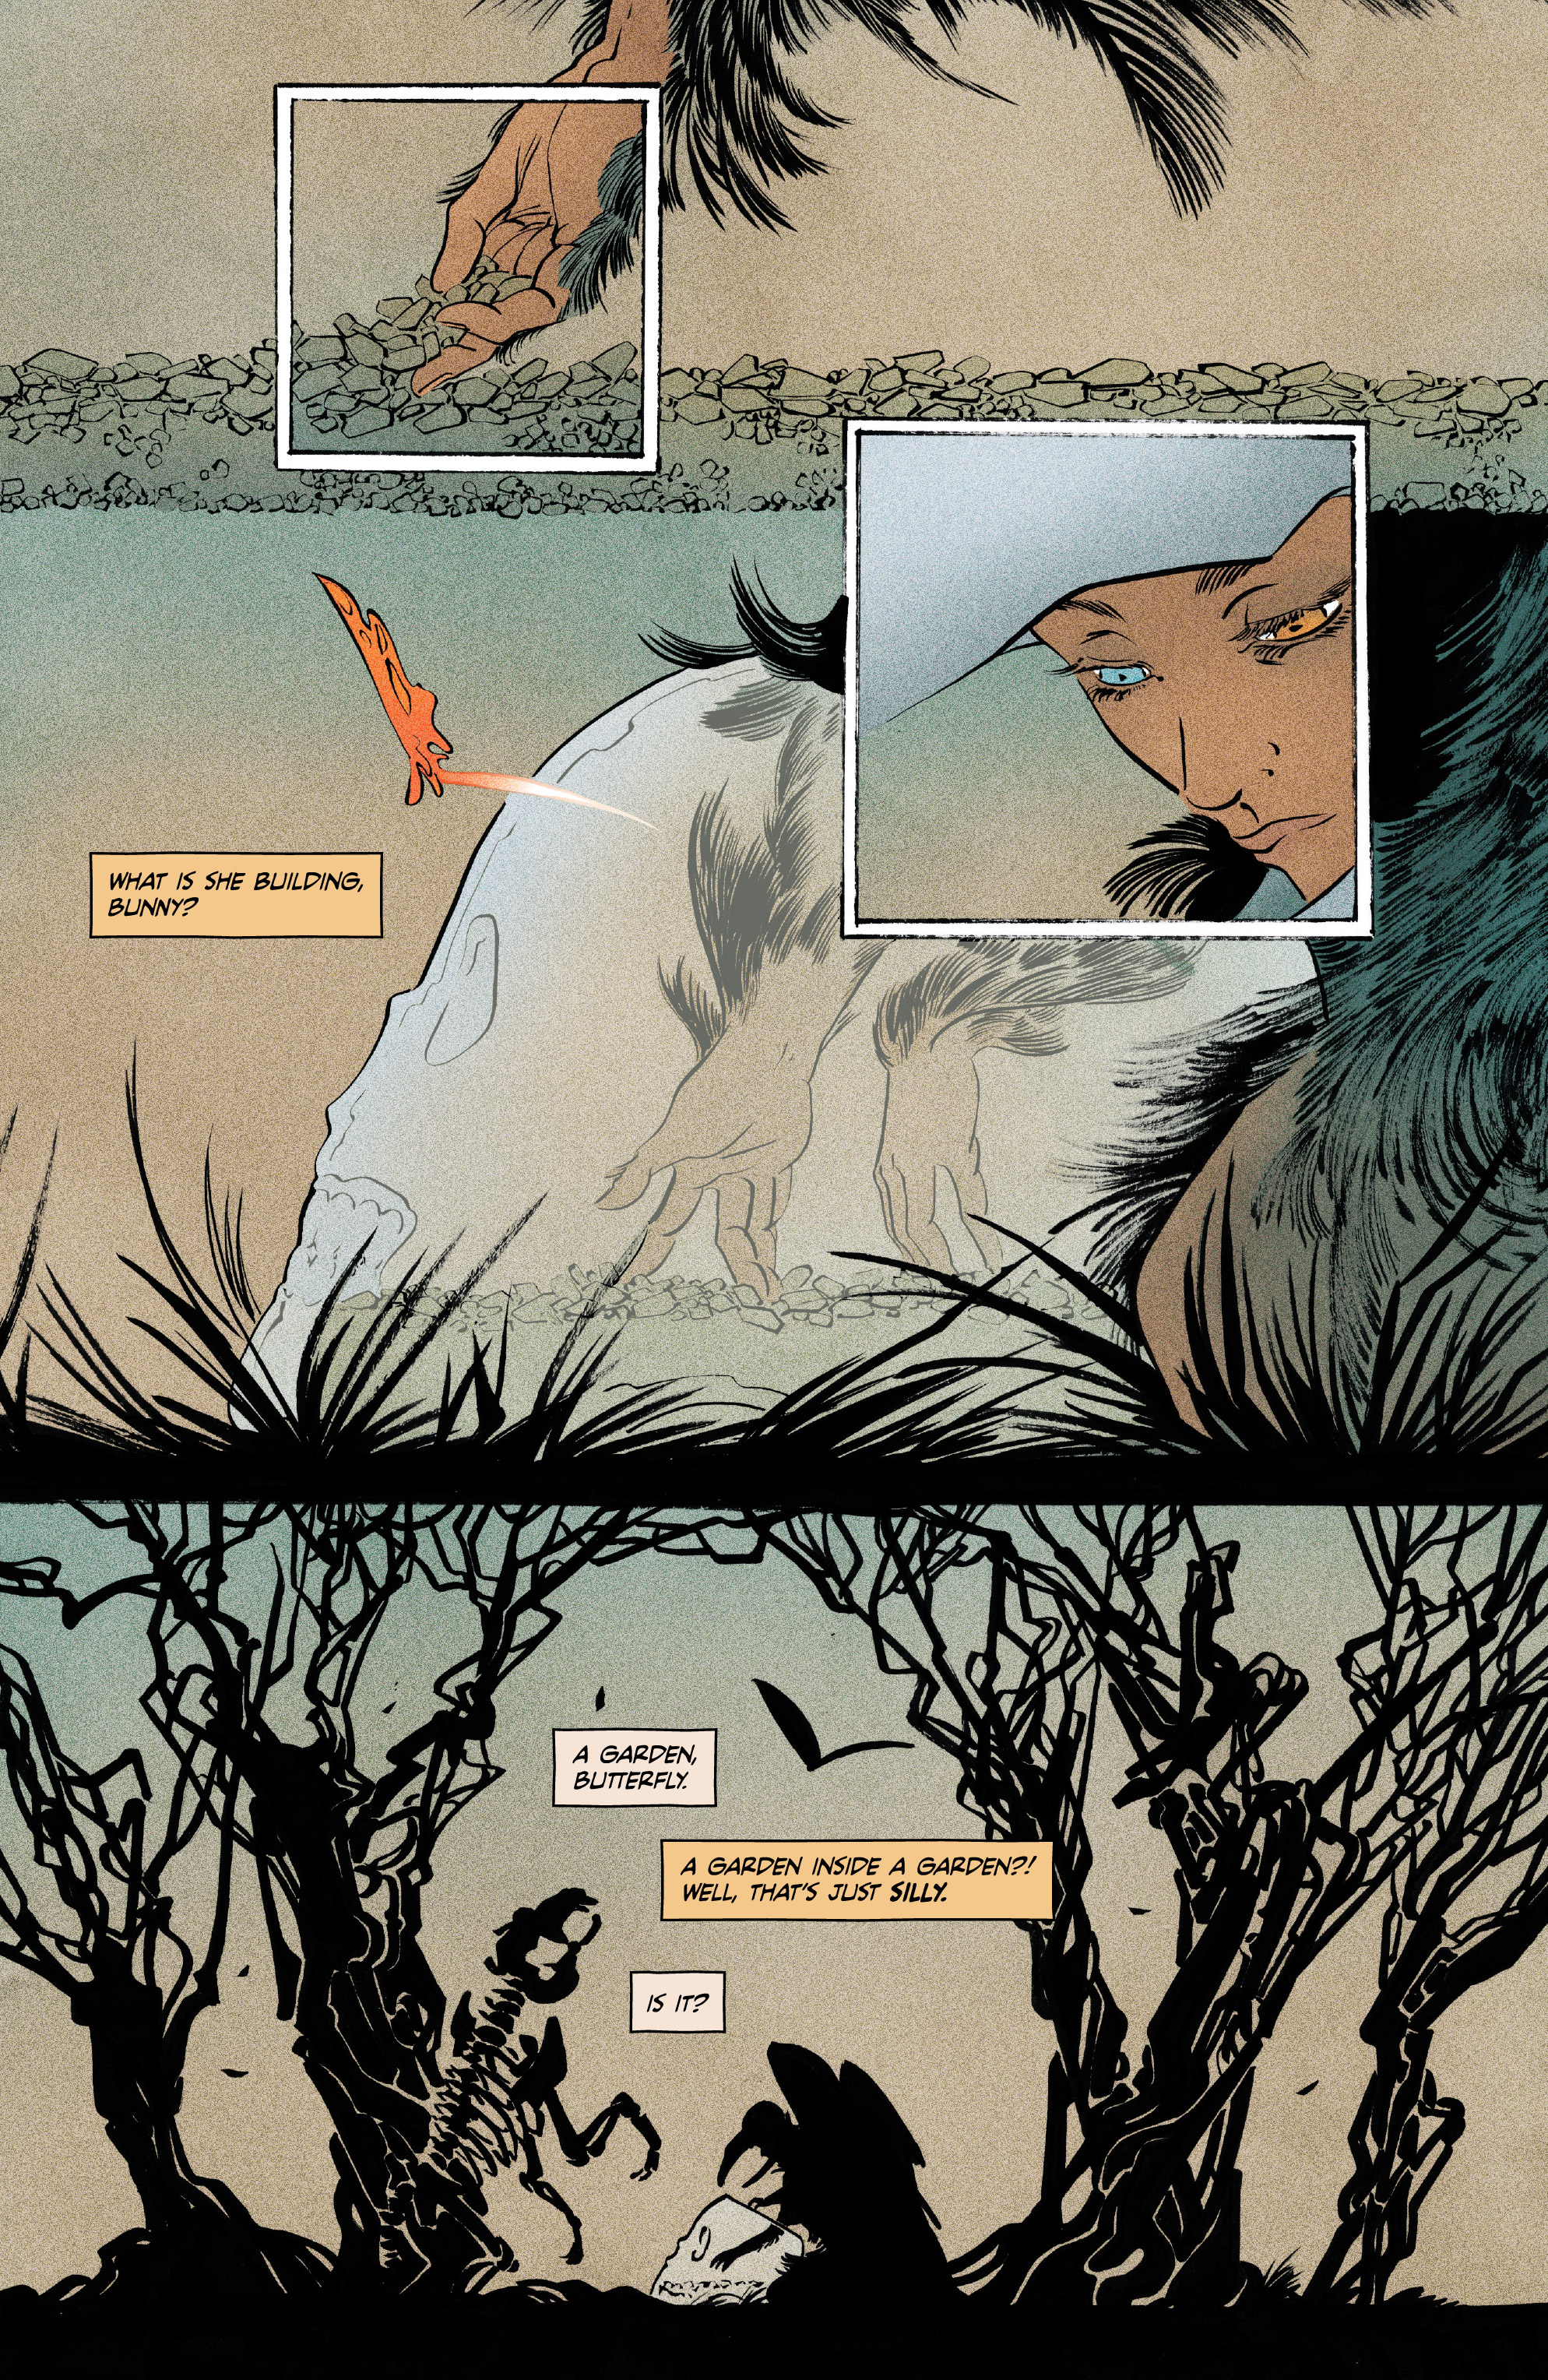 Pretty Deadly: The Rat (2019-): Chapter 3 - Page 3